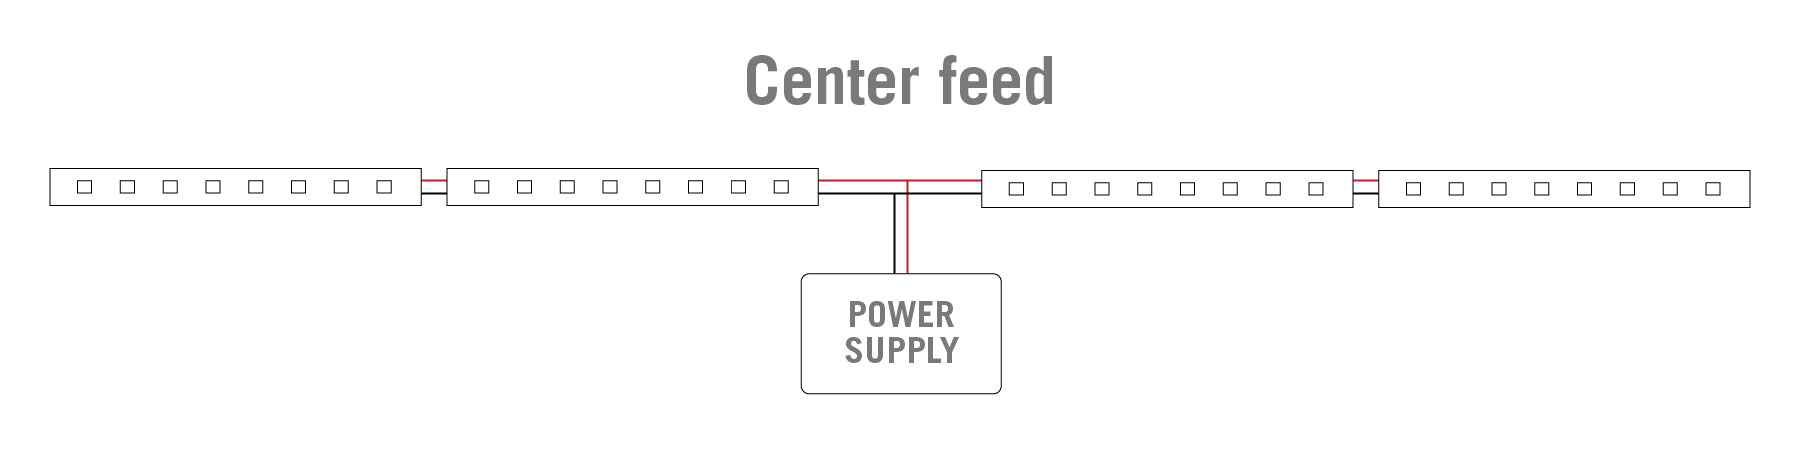 Center feed configuration